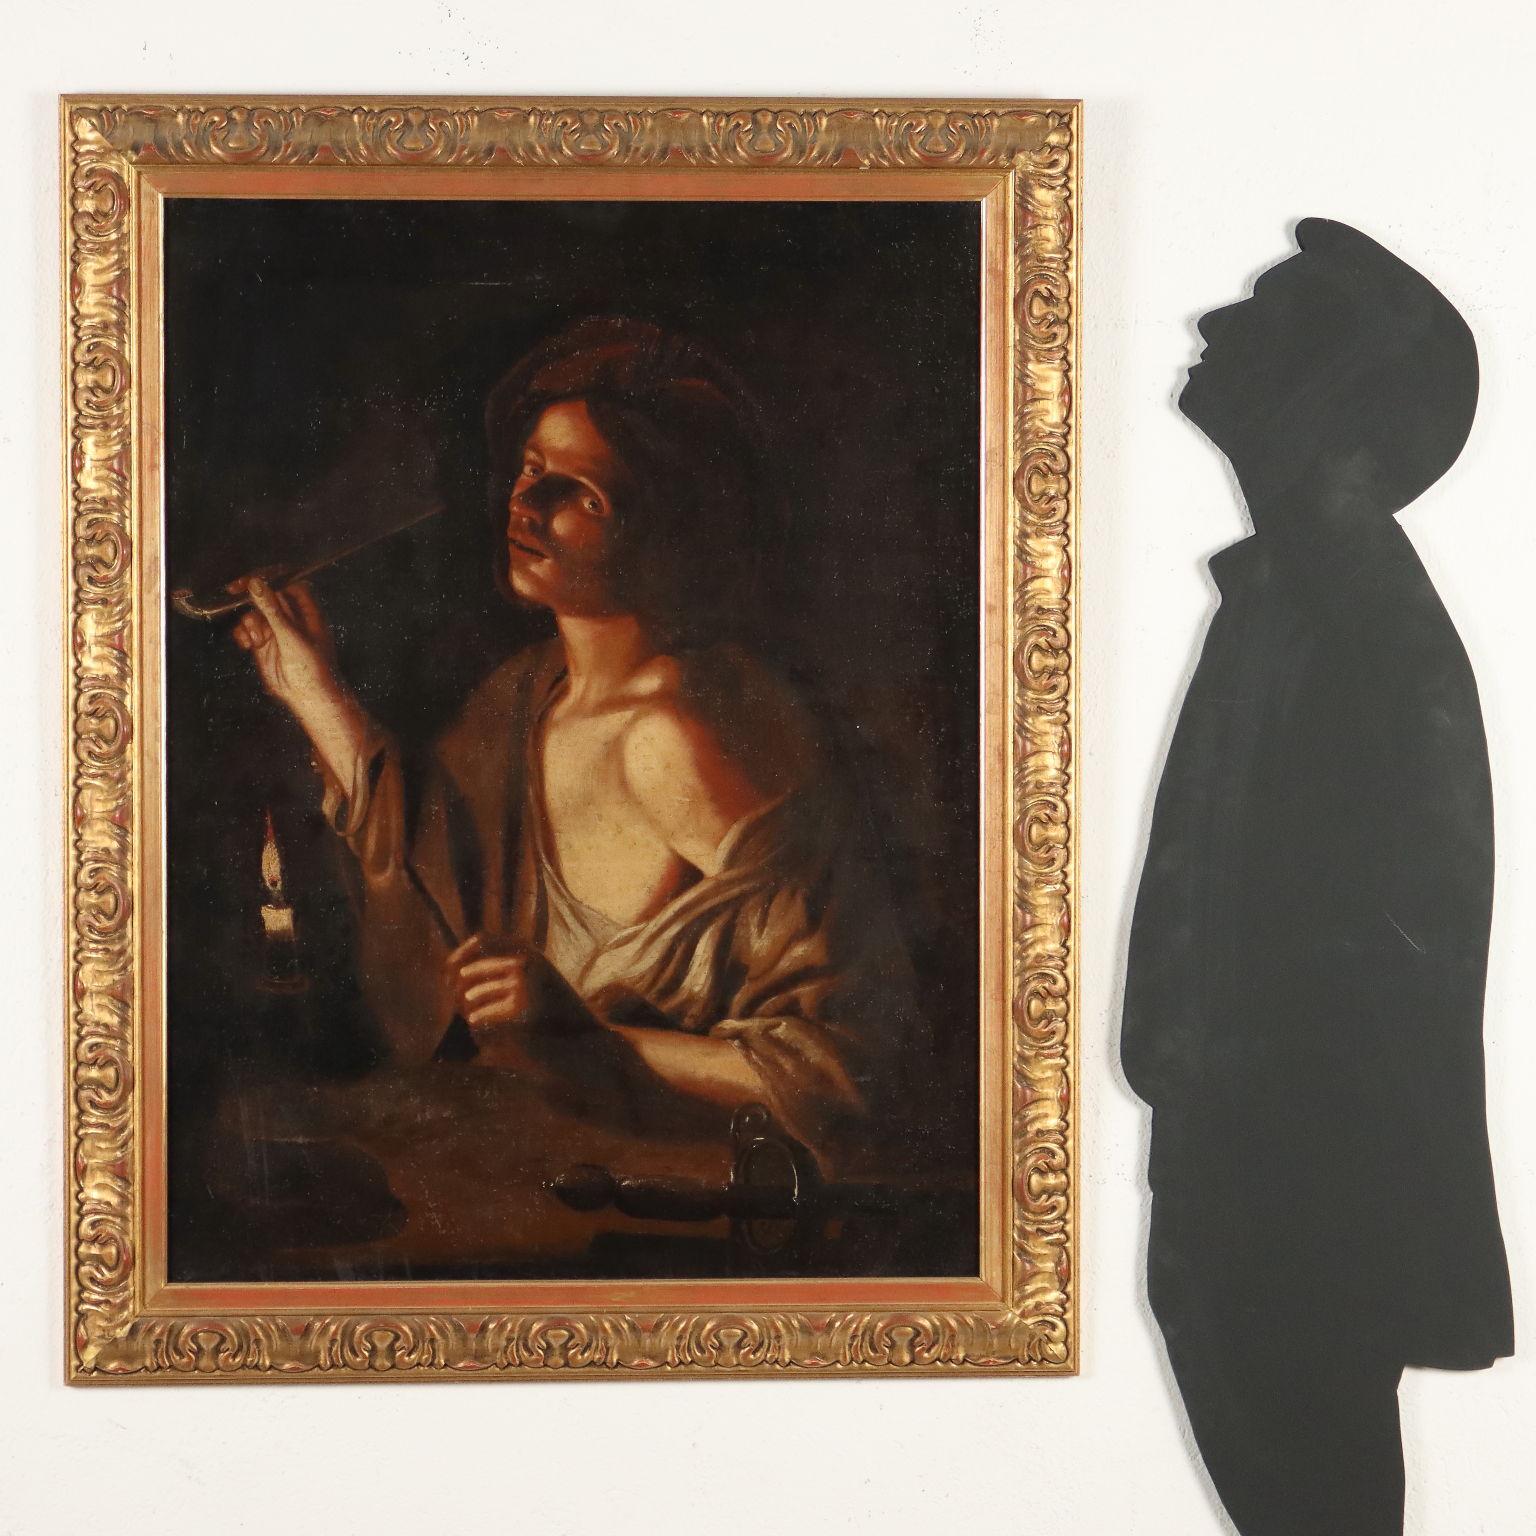 Oil on Canvas. 
The painting offers a half-length portrait of a young man in deshabillé who is lighting his pipe by drawing fire with a stick from the candle placed in front of him on the table where a sword also rests: perhaps this is a young